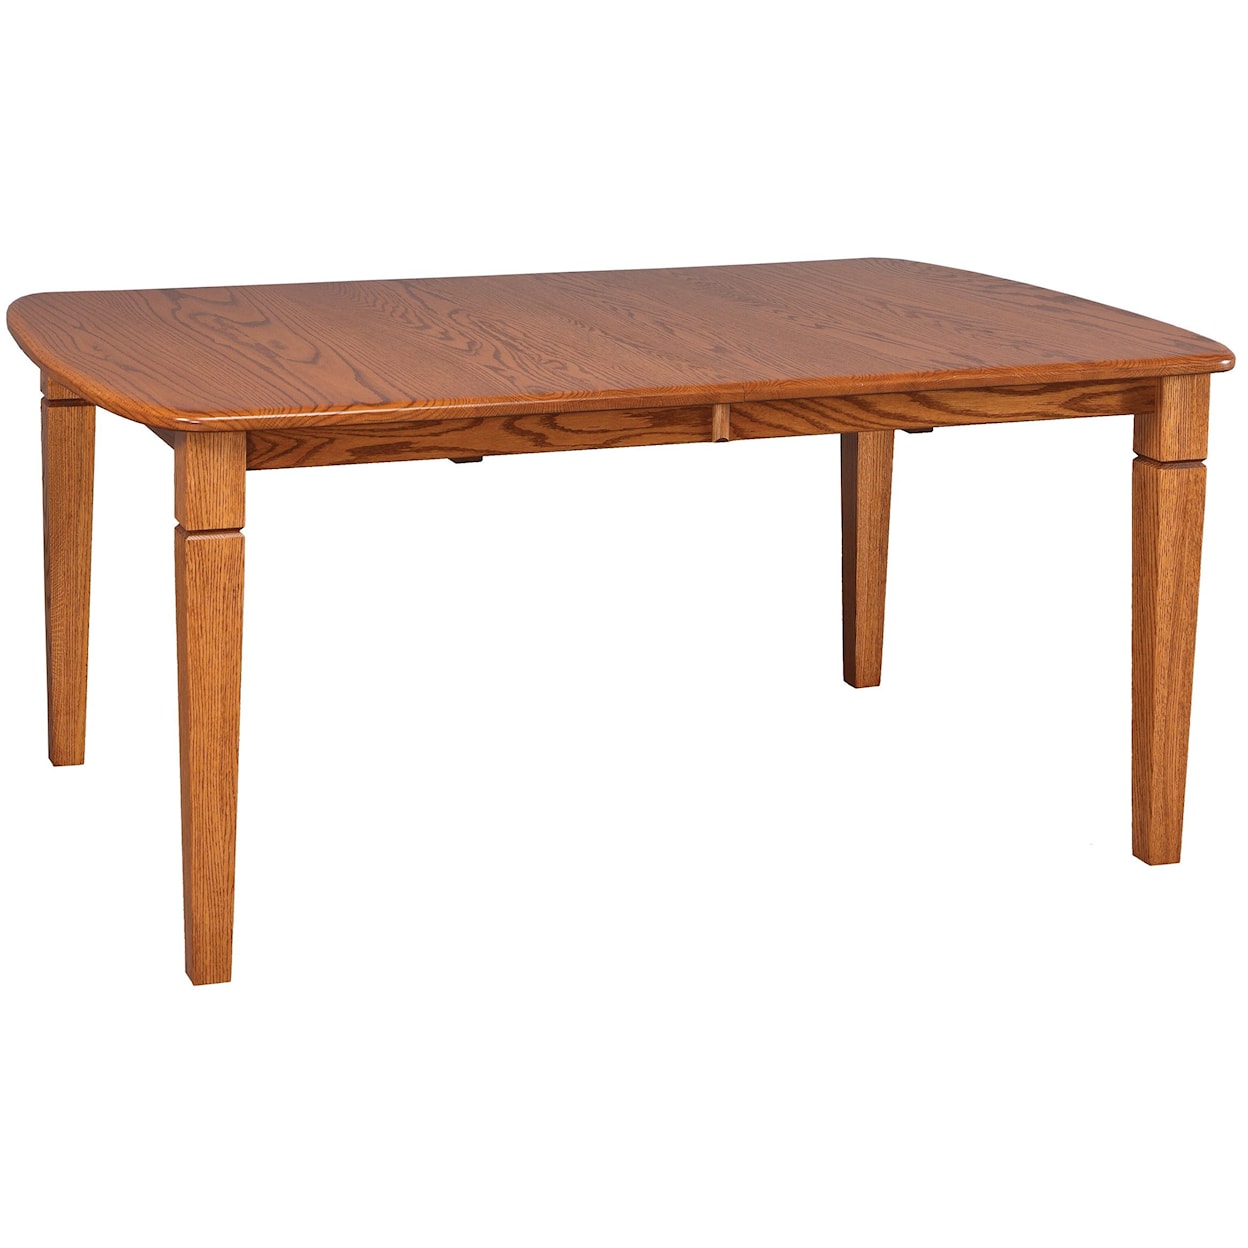 Daniels Amish Tables 42" Solid Wood Table